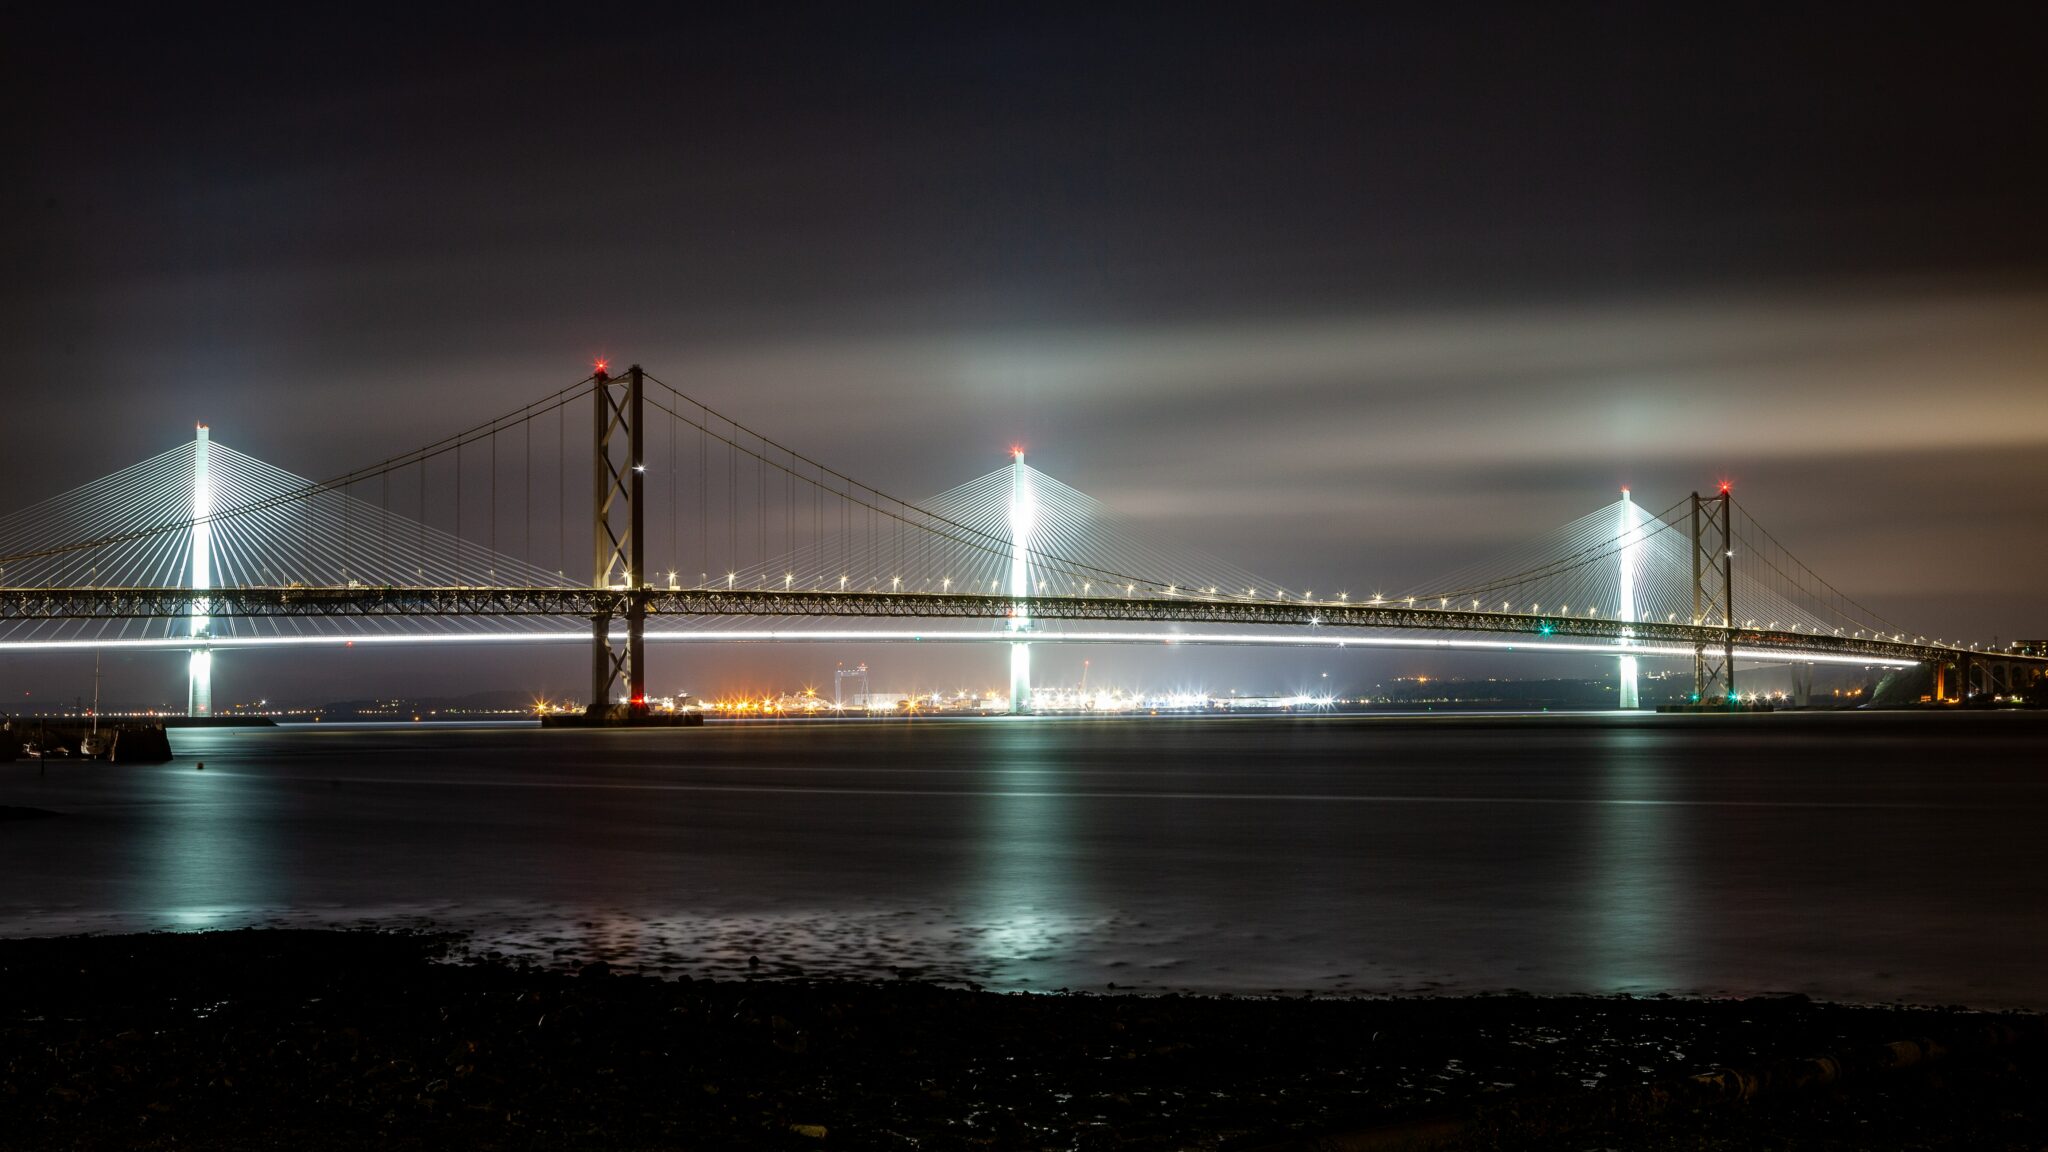 OVERNIGHT CLOSURE OF QUEENSFERRY CROSSING AND FORTH ROAD BRIDGE